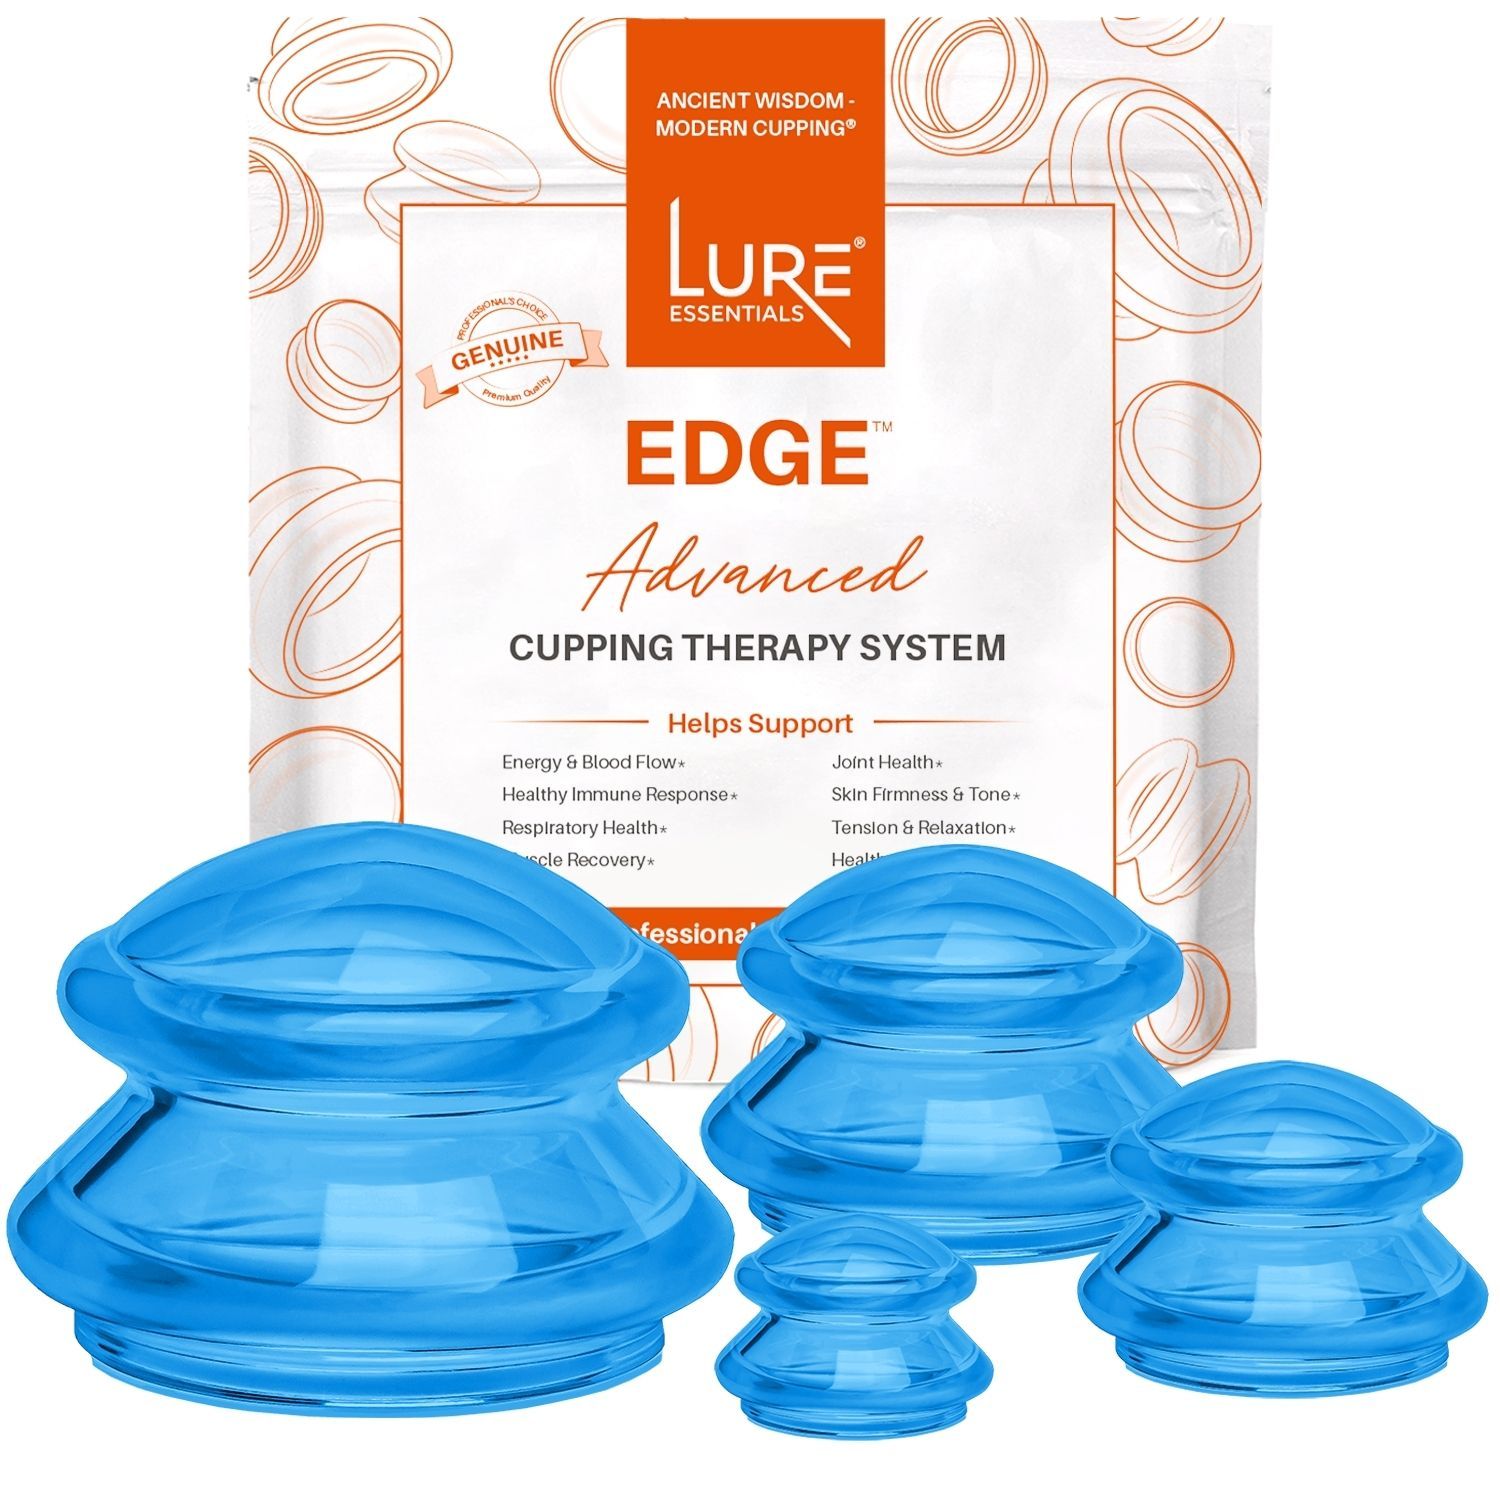 Muscle & Nerve Pain Tagged best cupping set - Lure Essentials